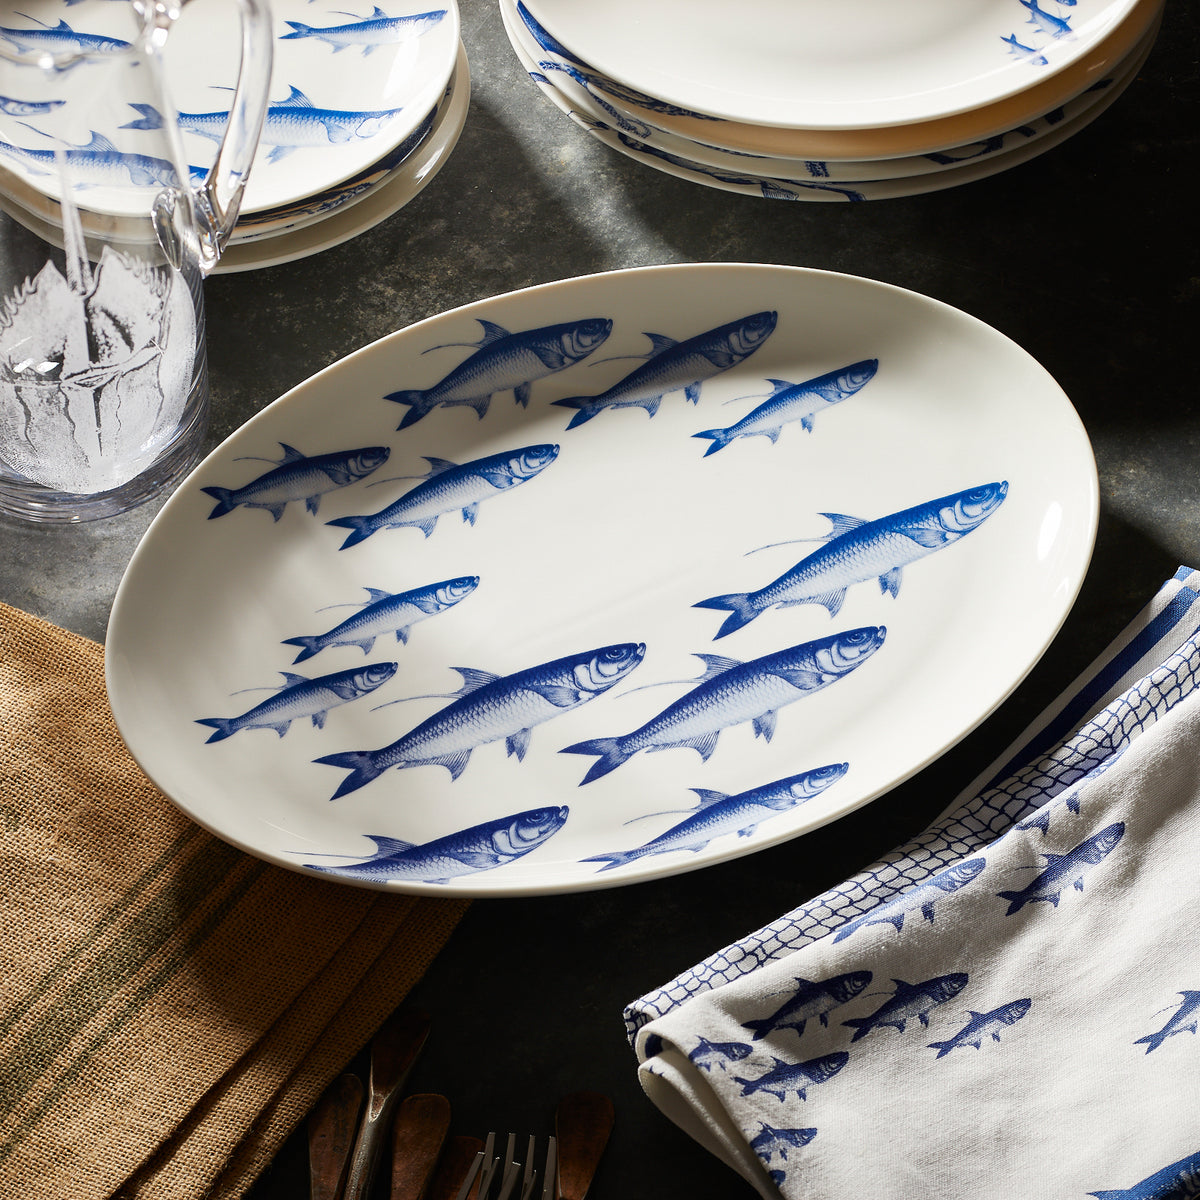 A white oval dish featuring a blue fish pattern is displayed on a dark surface, accompanied by a folded napkin with a similar fish design and other stacked plates in the background. This ensemble is part of the Lake House Bundle by Caskata.